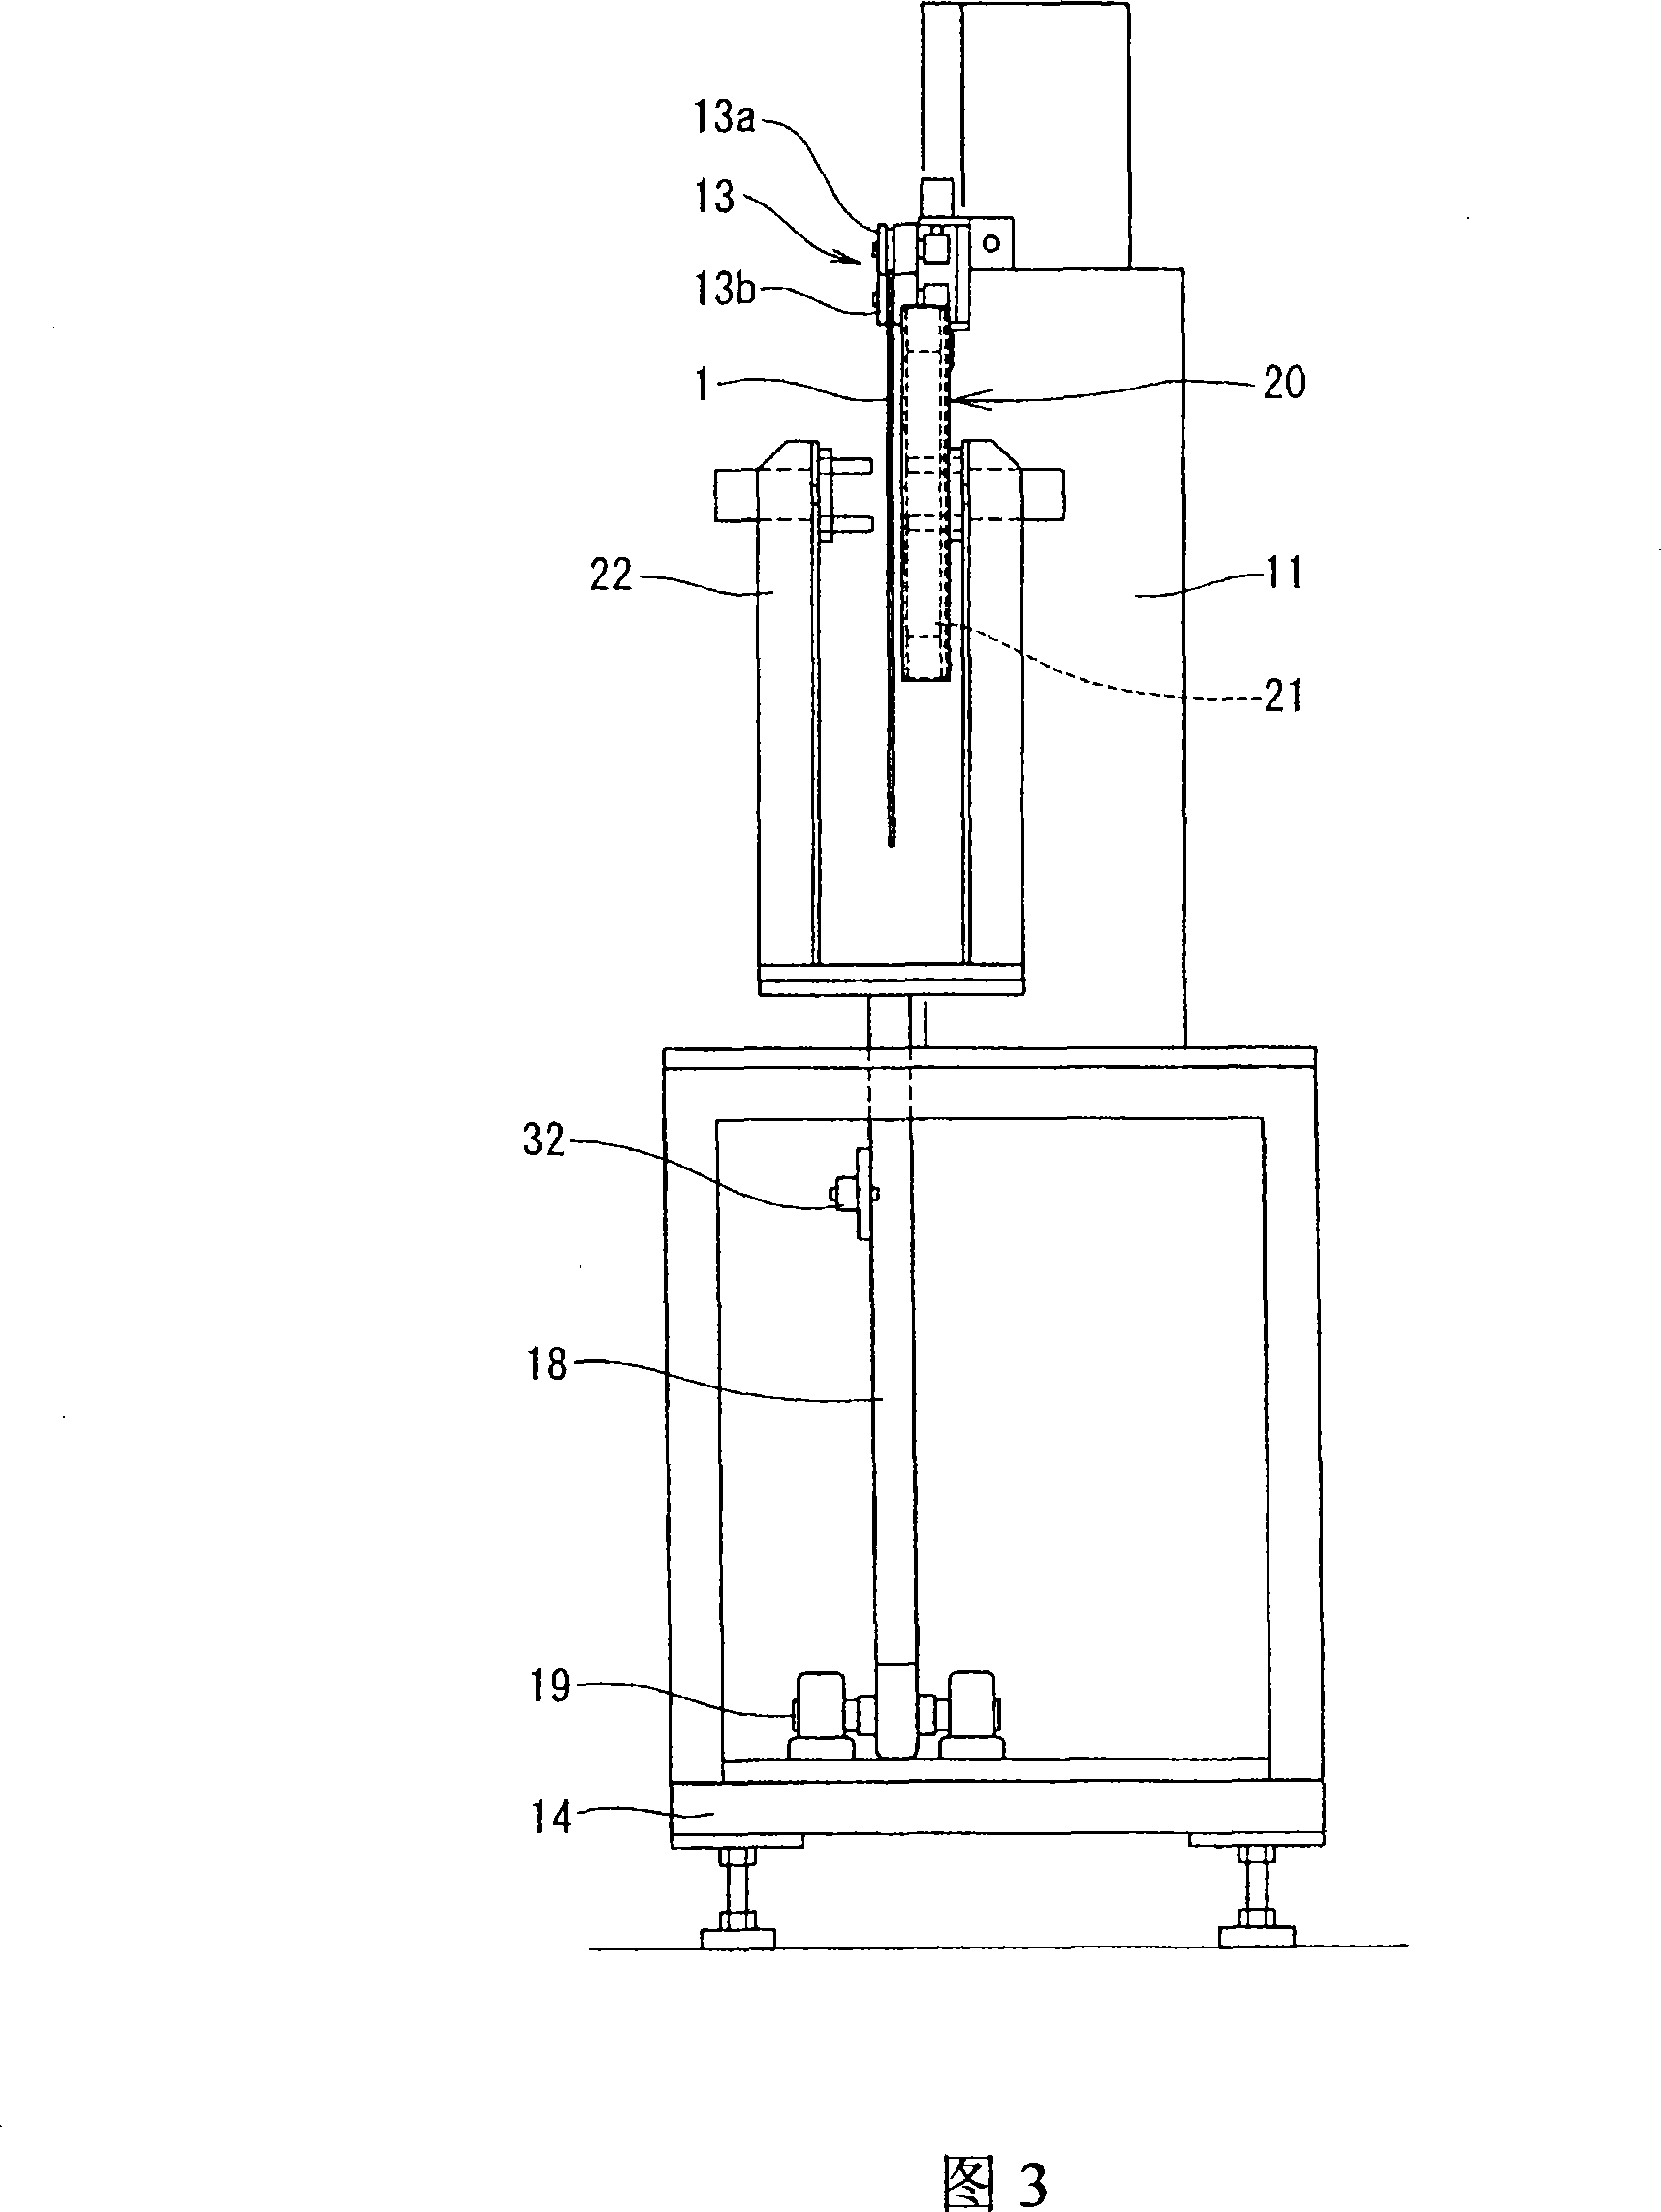 Method and apparatus of manufacturing annular concentric stranded bead cord